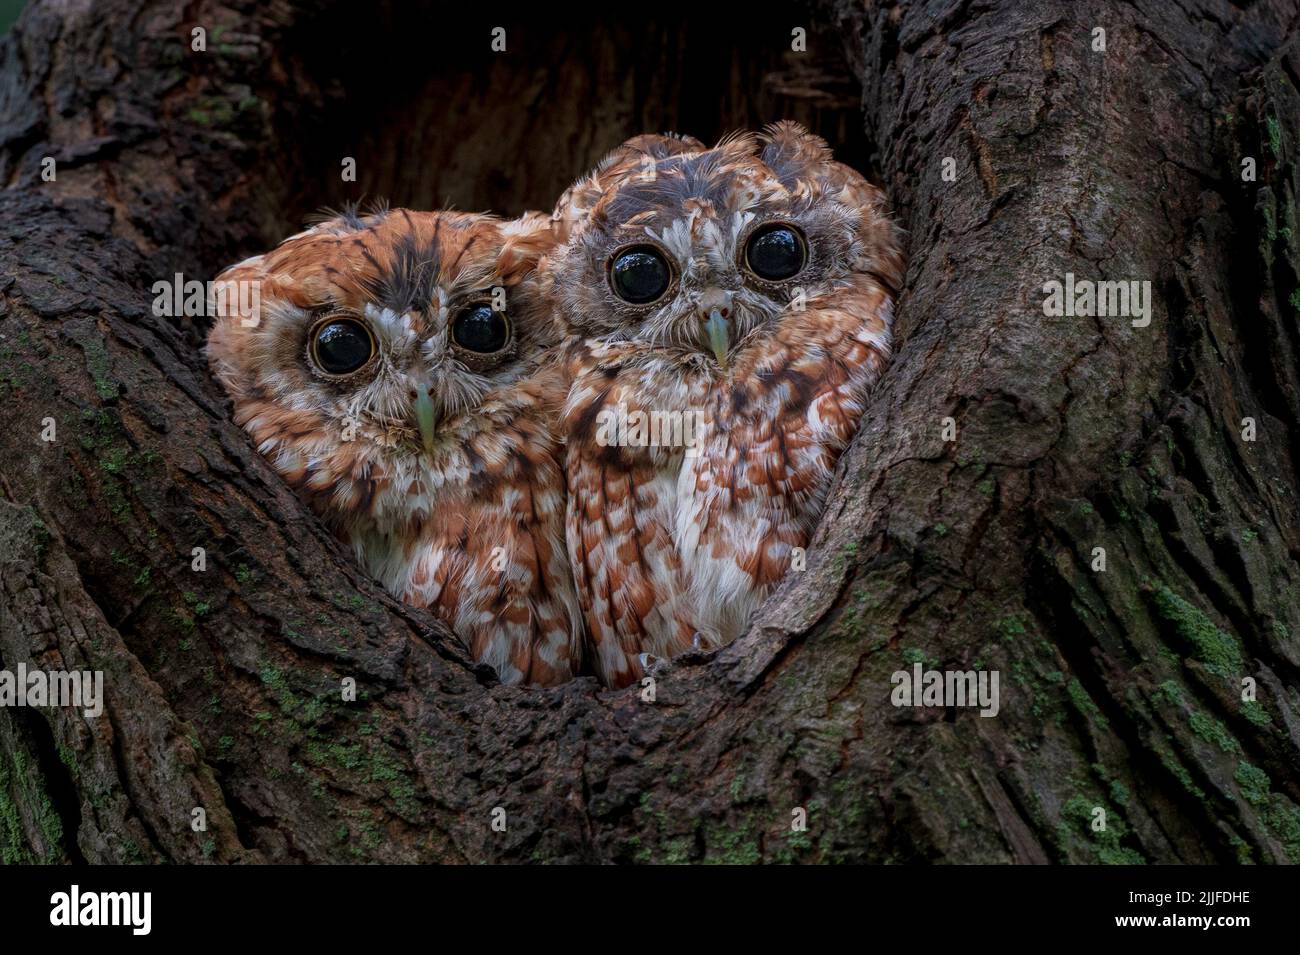 They live in tree hollows. Massachusetts, US: THESE ADORABLE pictures show two little owls cuddled up together inside a tree. One image shows the two Stock Photo